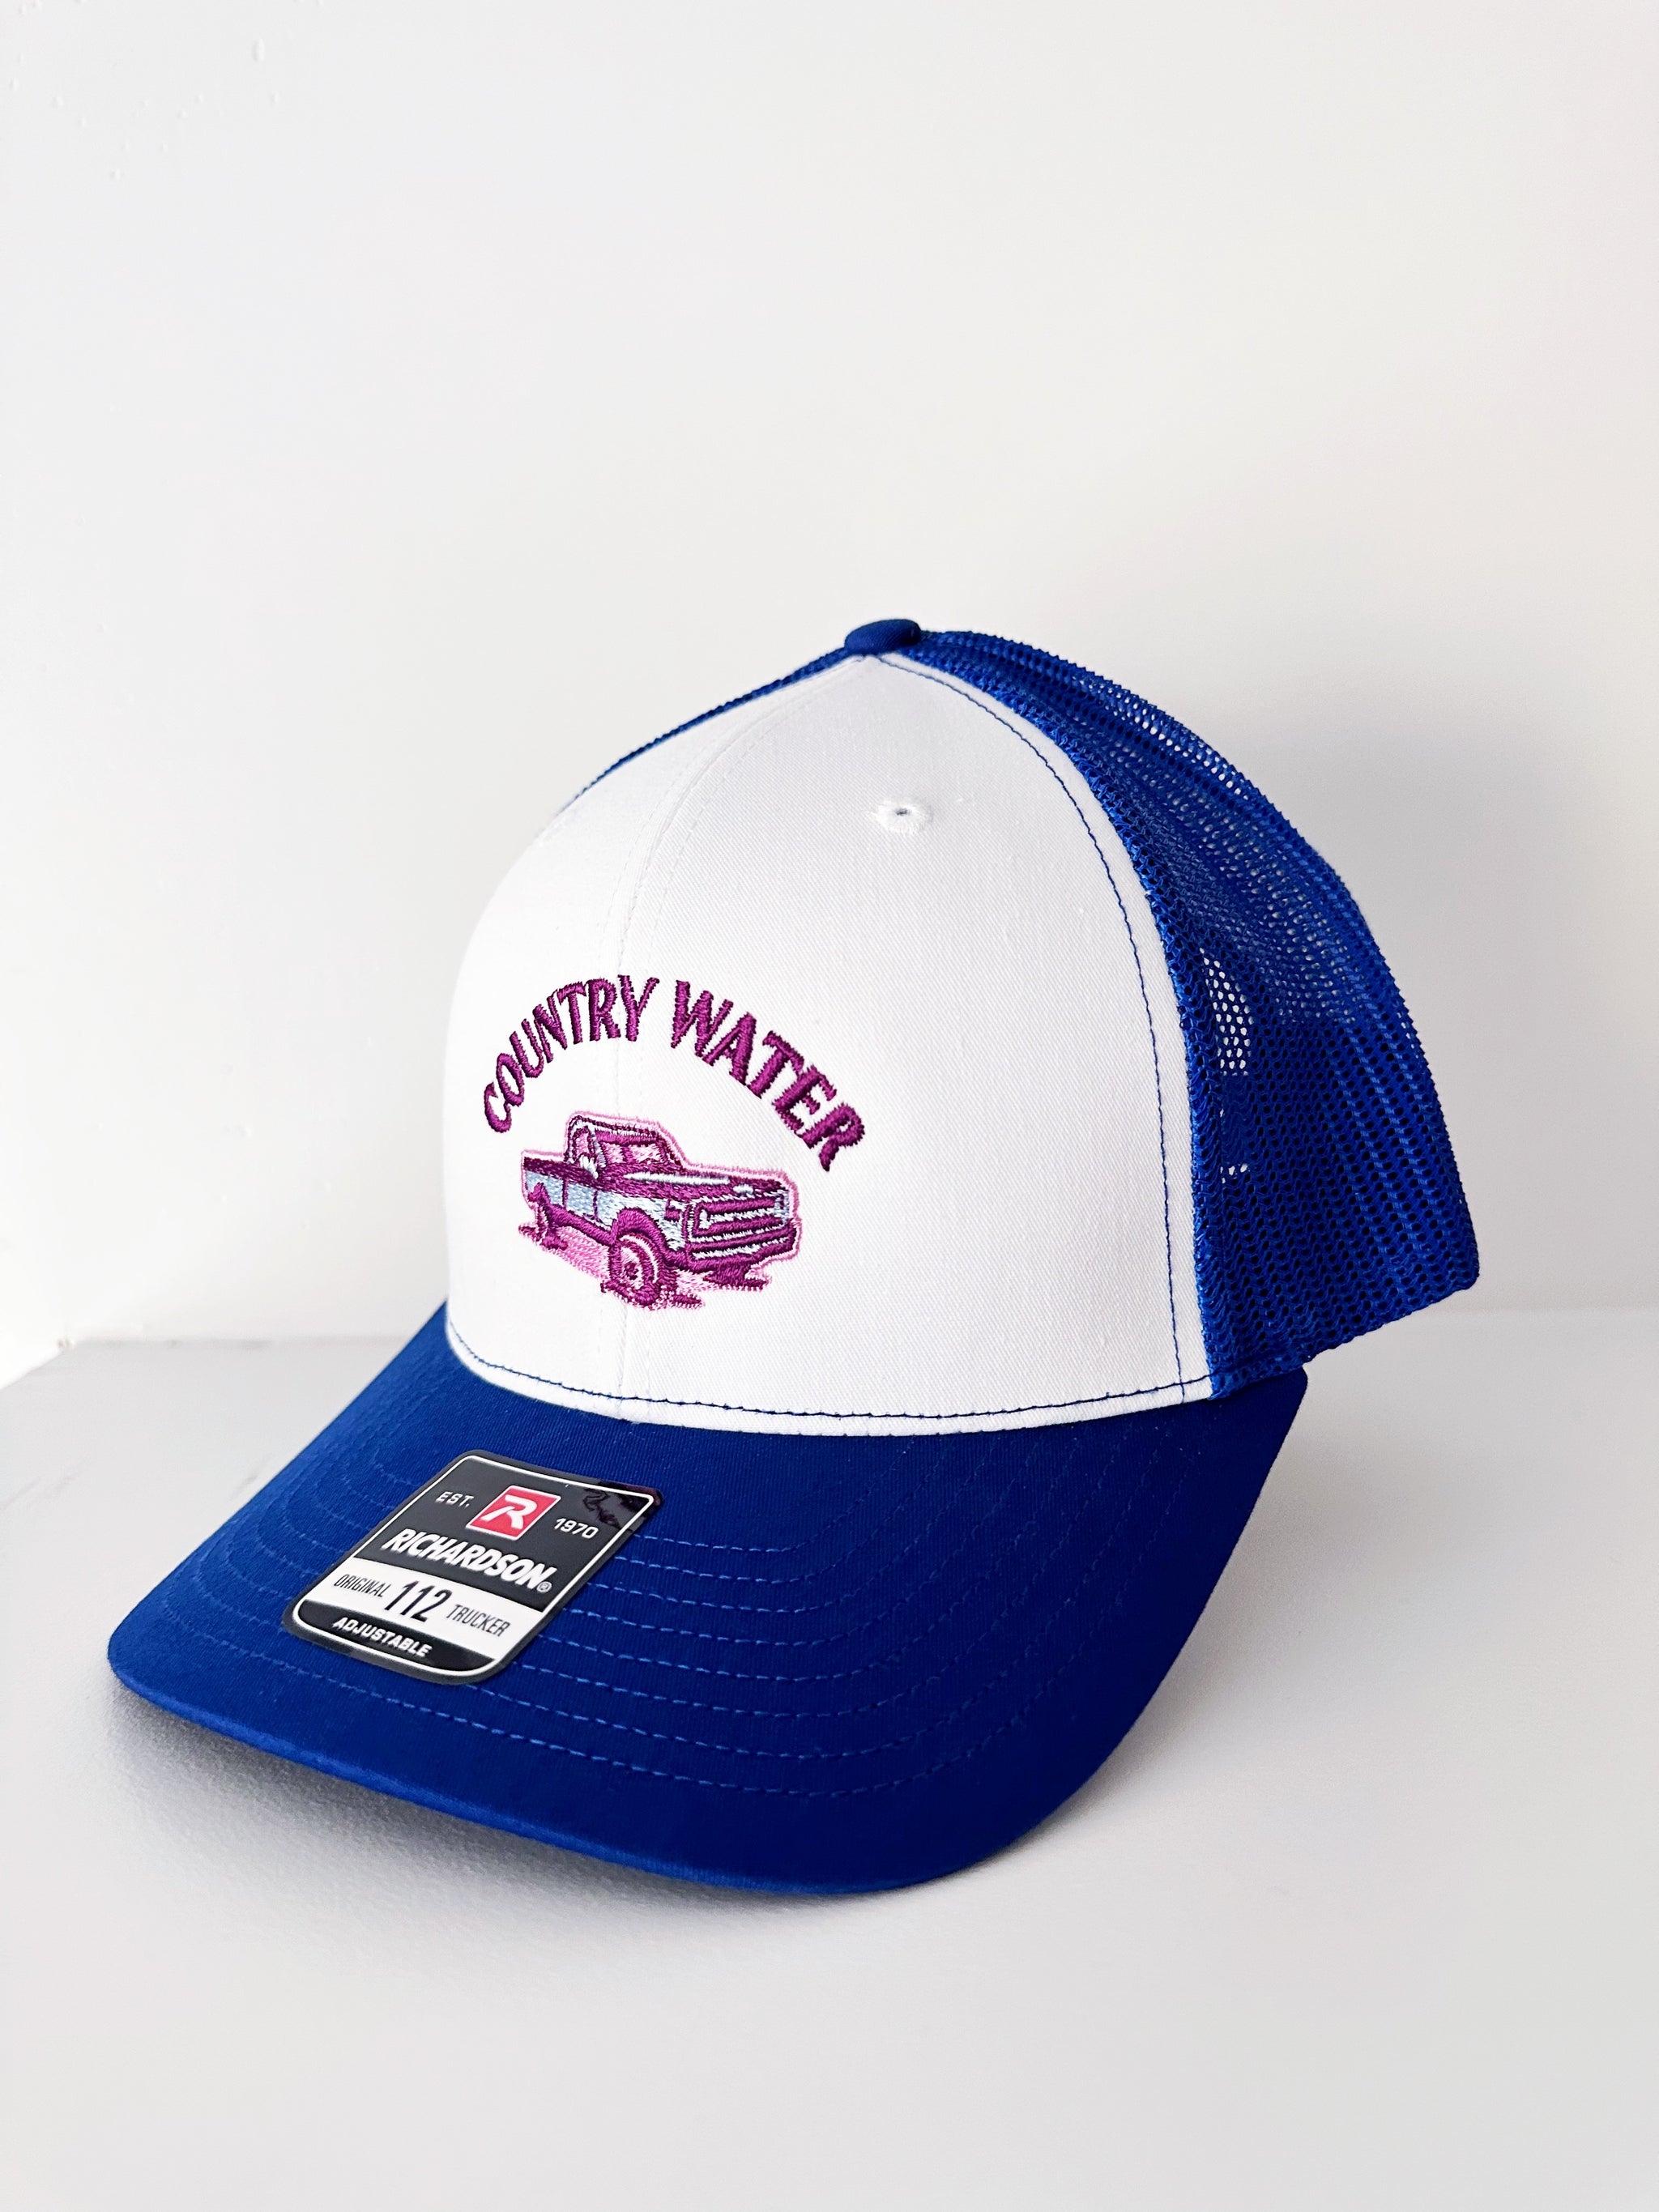 Blue Trucker Hat – Country Water